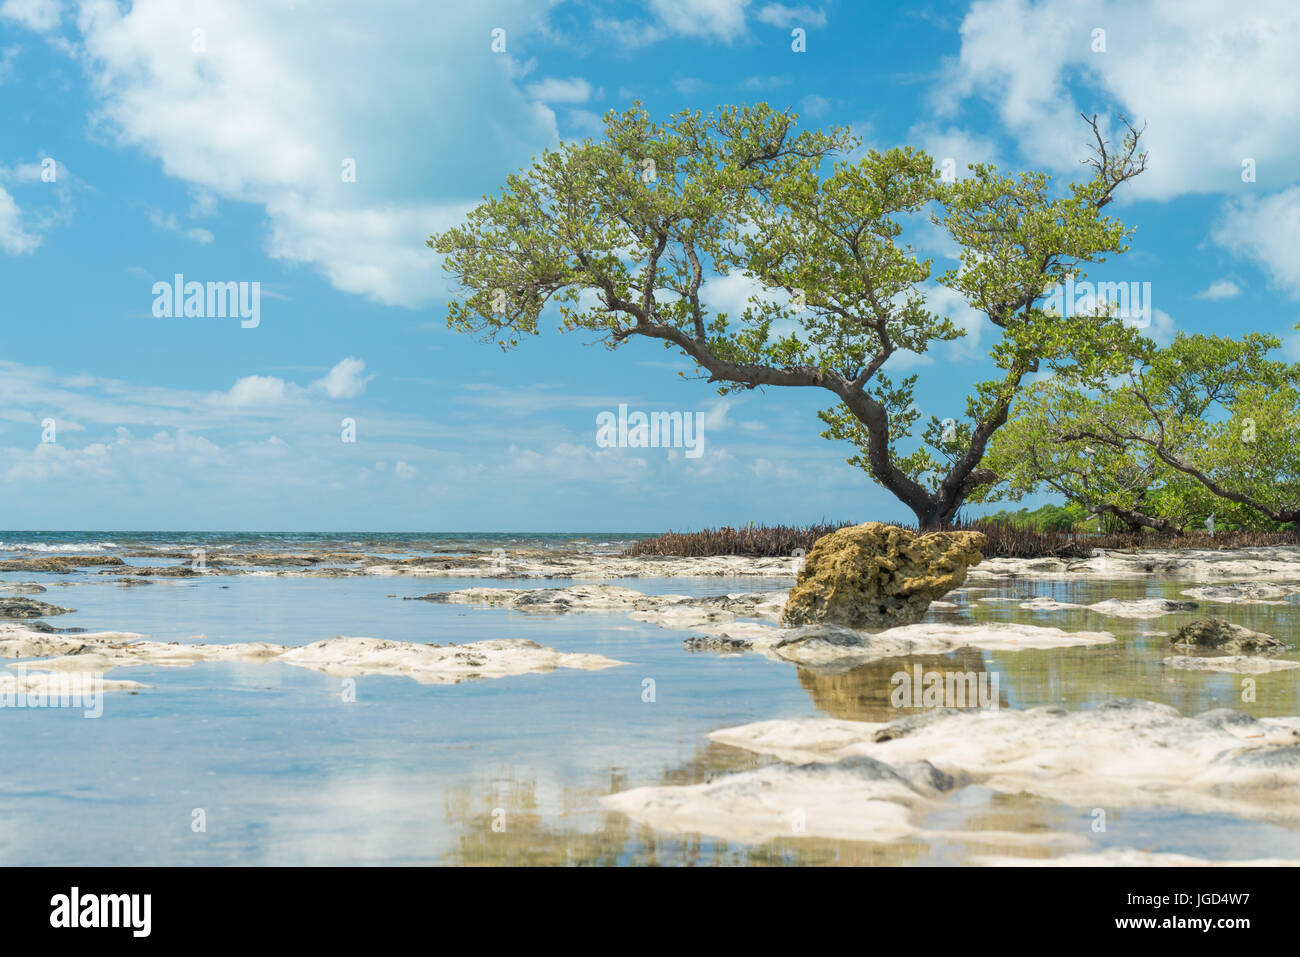 Shallow reef coastline in the caribbean with tree in the foreground. Stock Photo